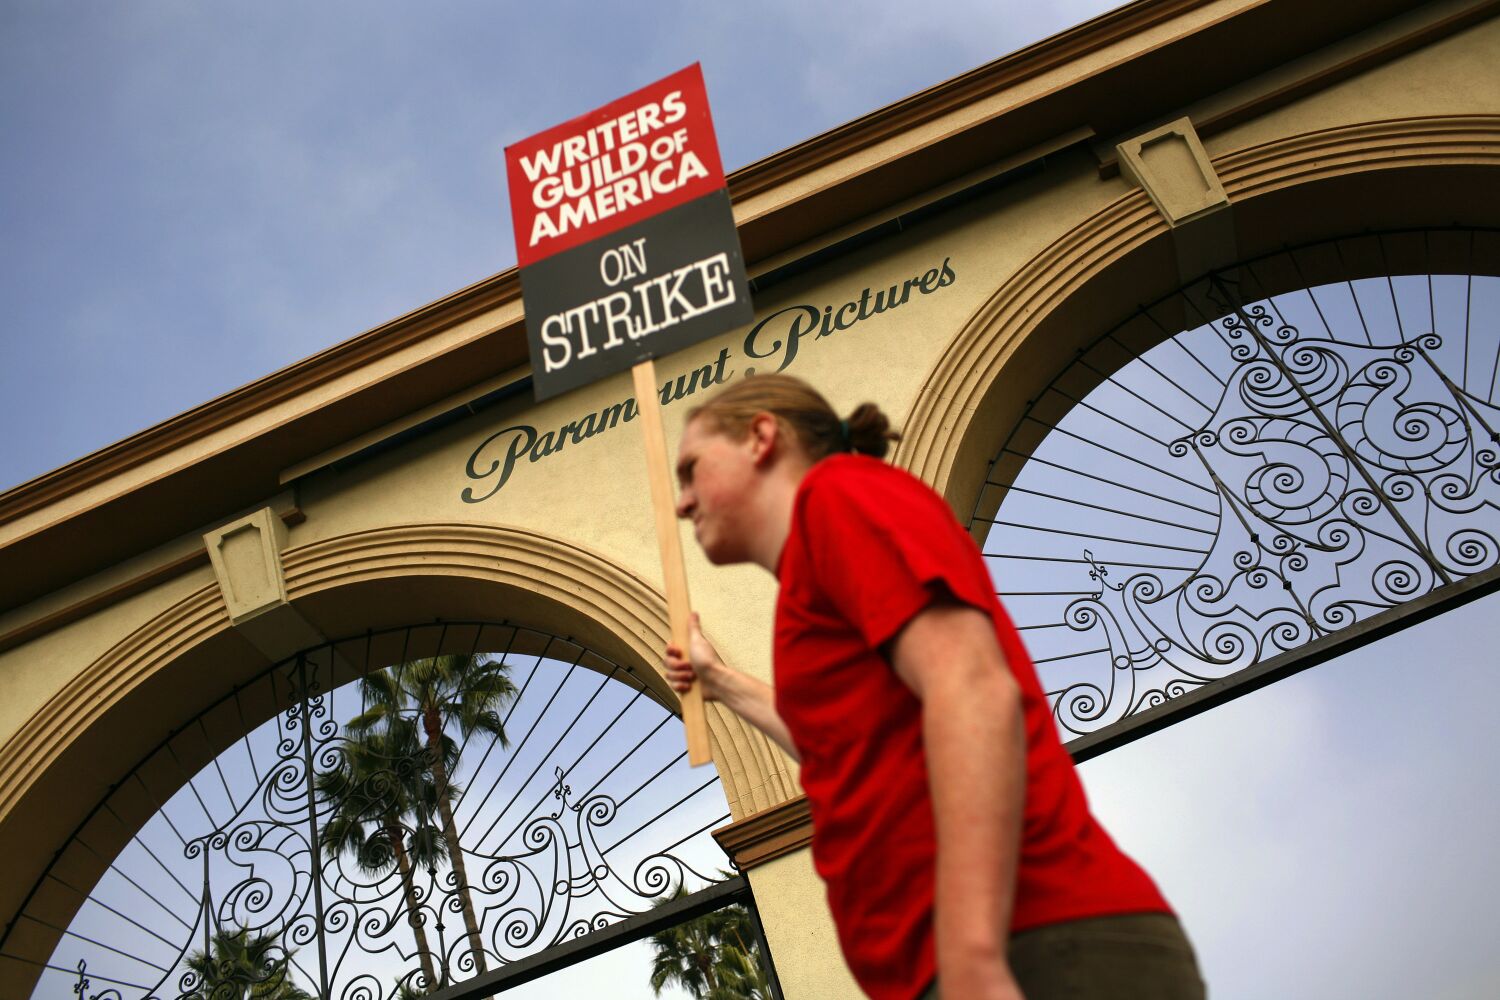 Writers Guild and studios continue talks, but deal remains elusive as possible strike looms